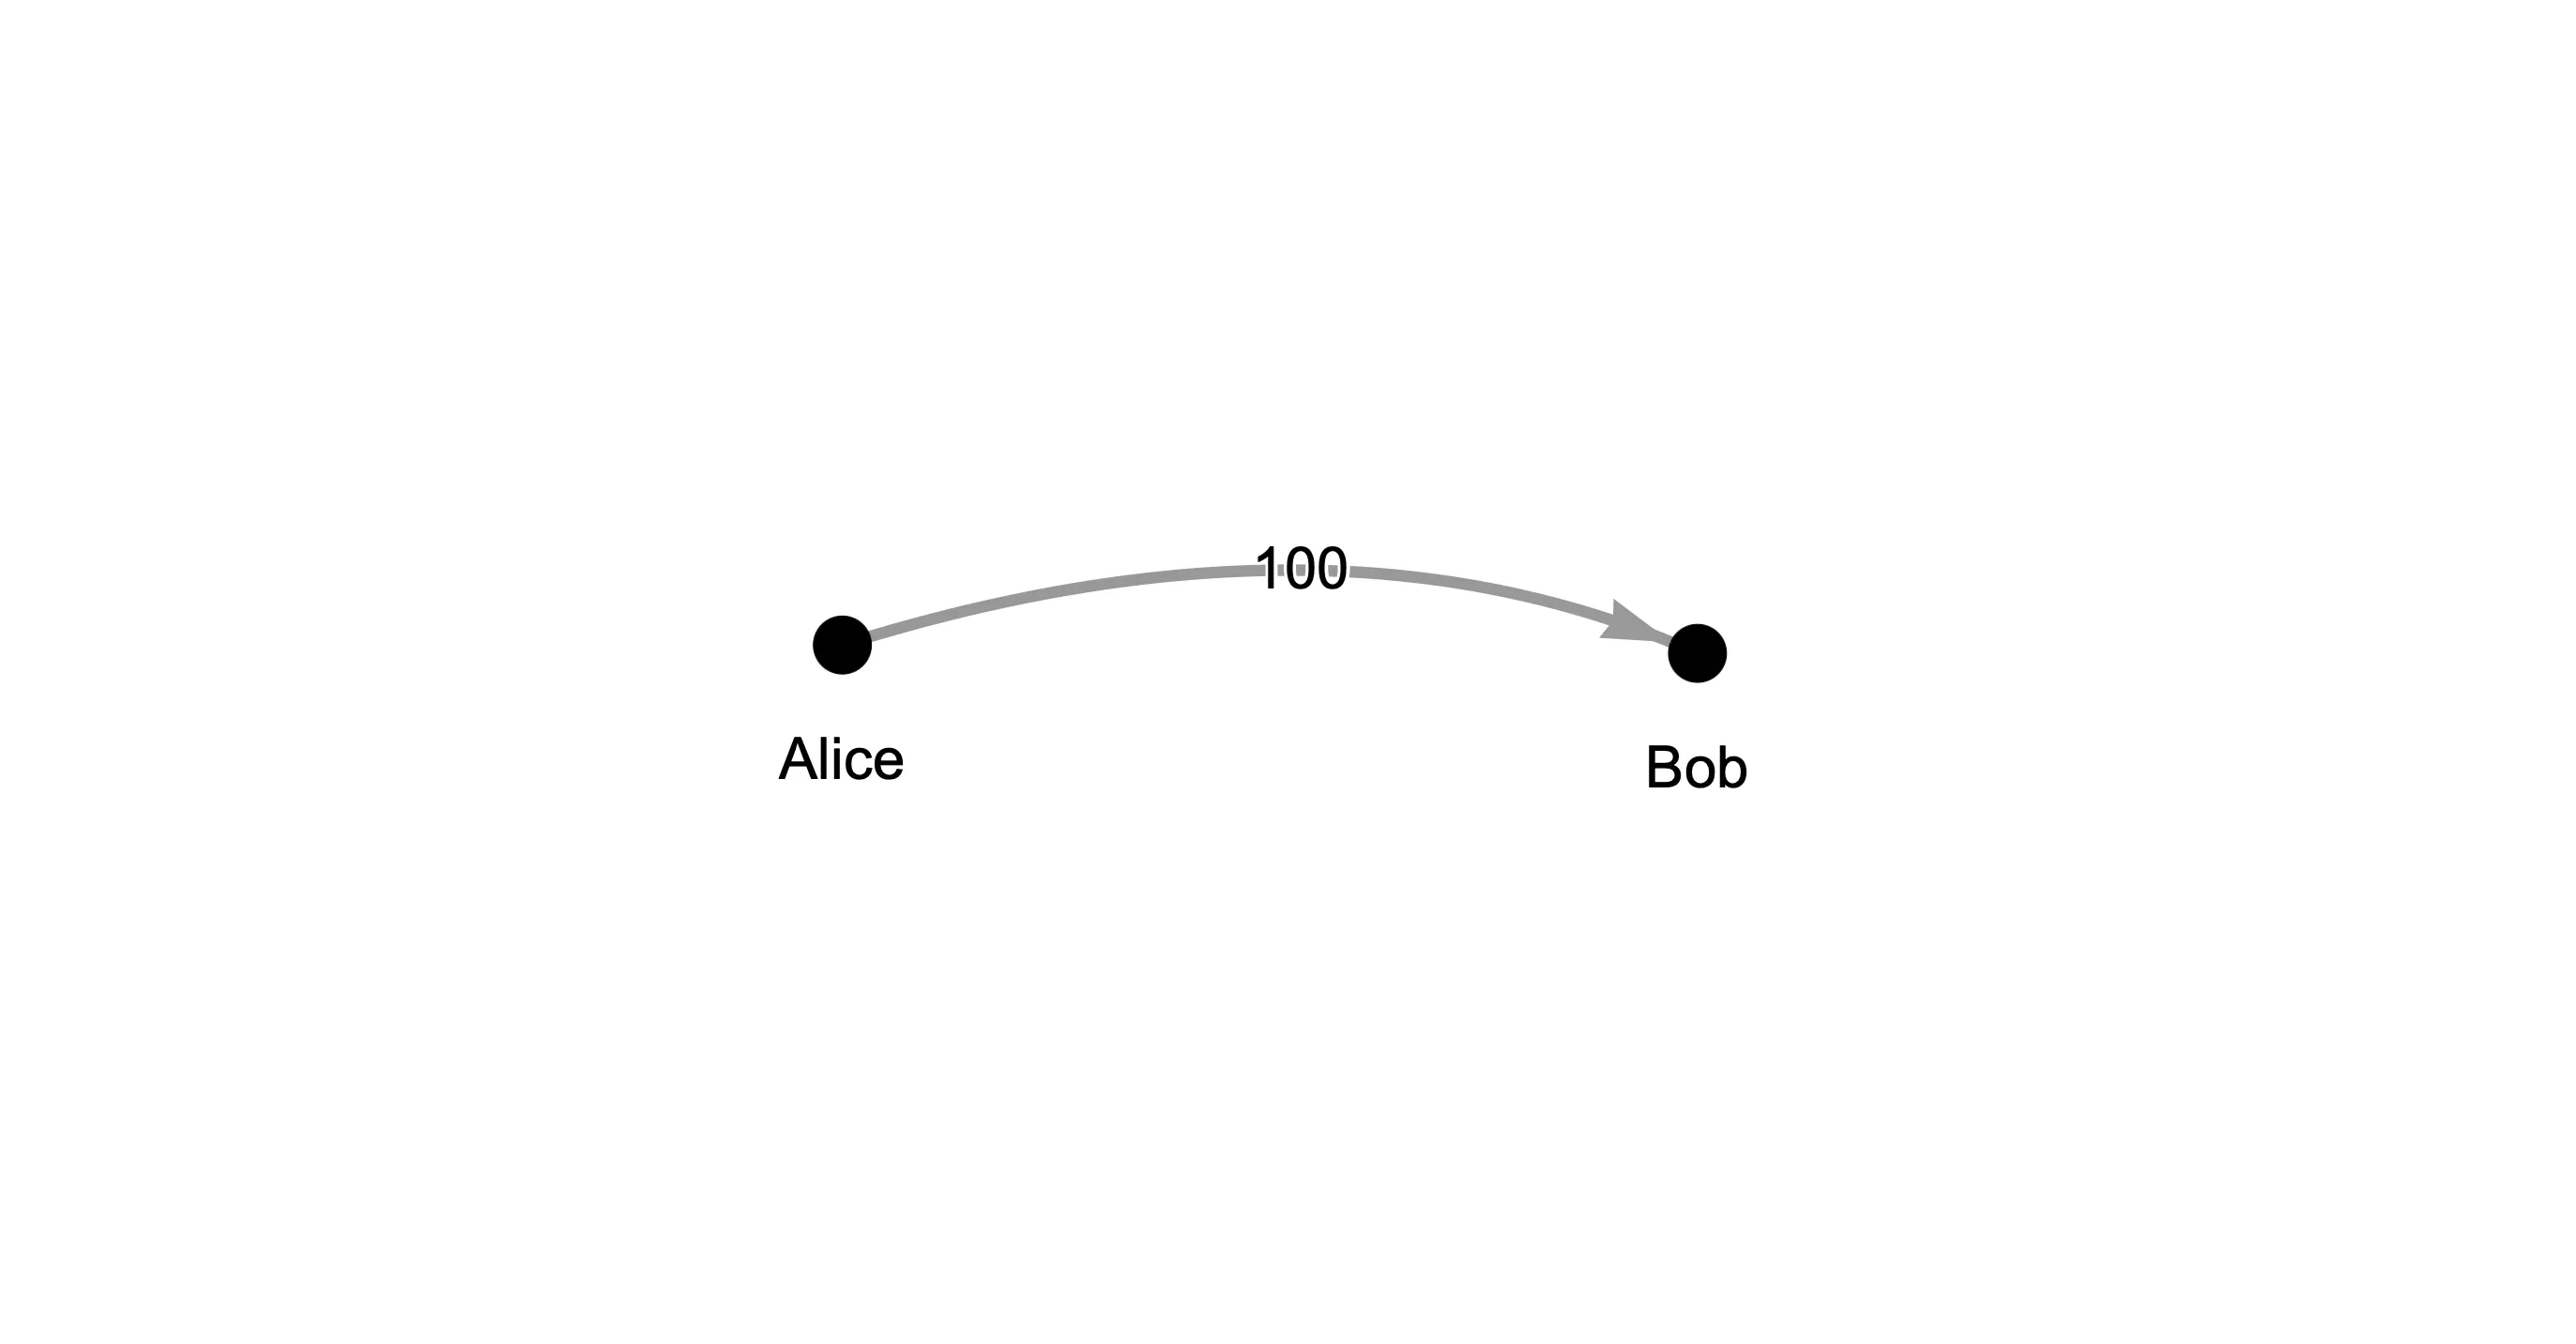 A directed, weighted graph with two nodes labeled Alice and Bob and an arrow pointing from Alice to Bob with a label of 100.